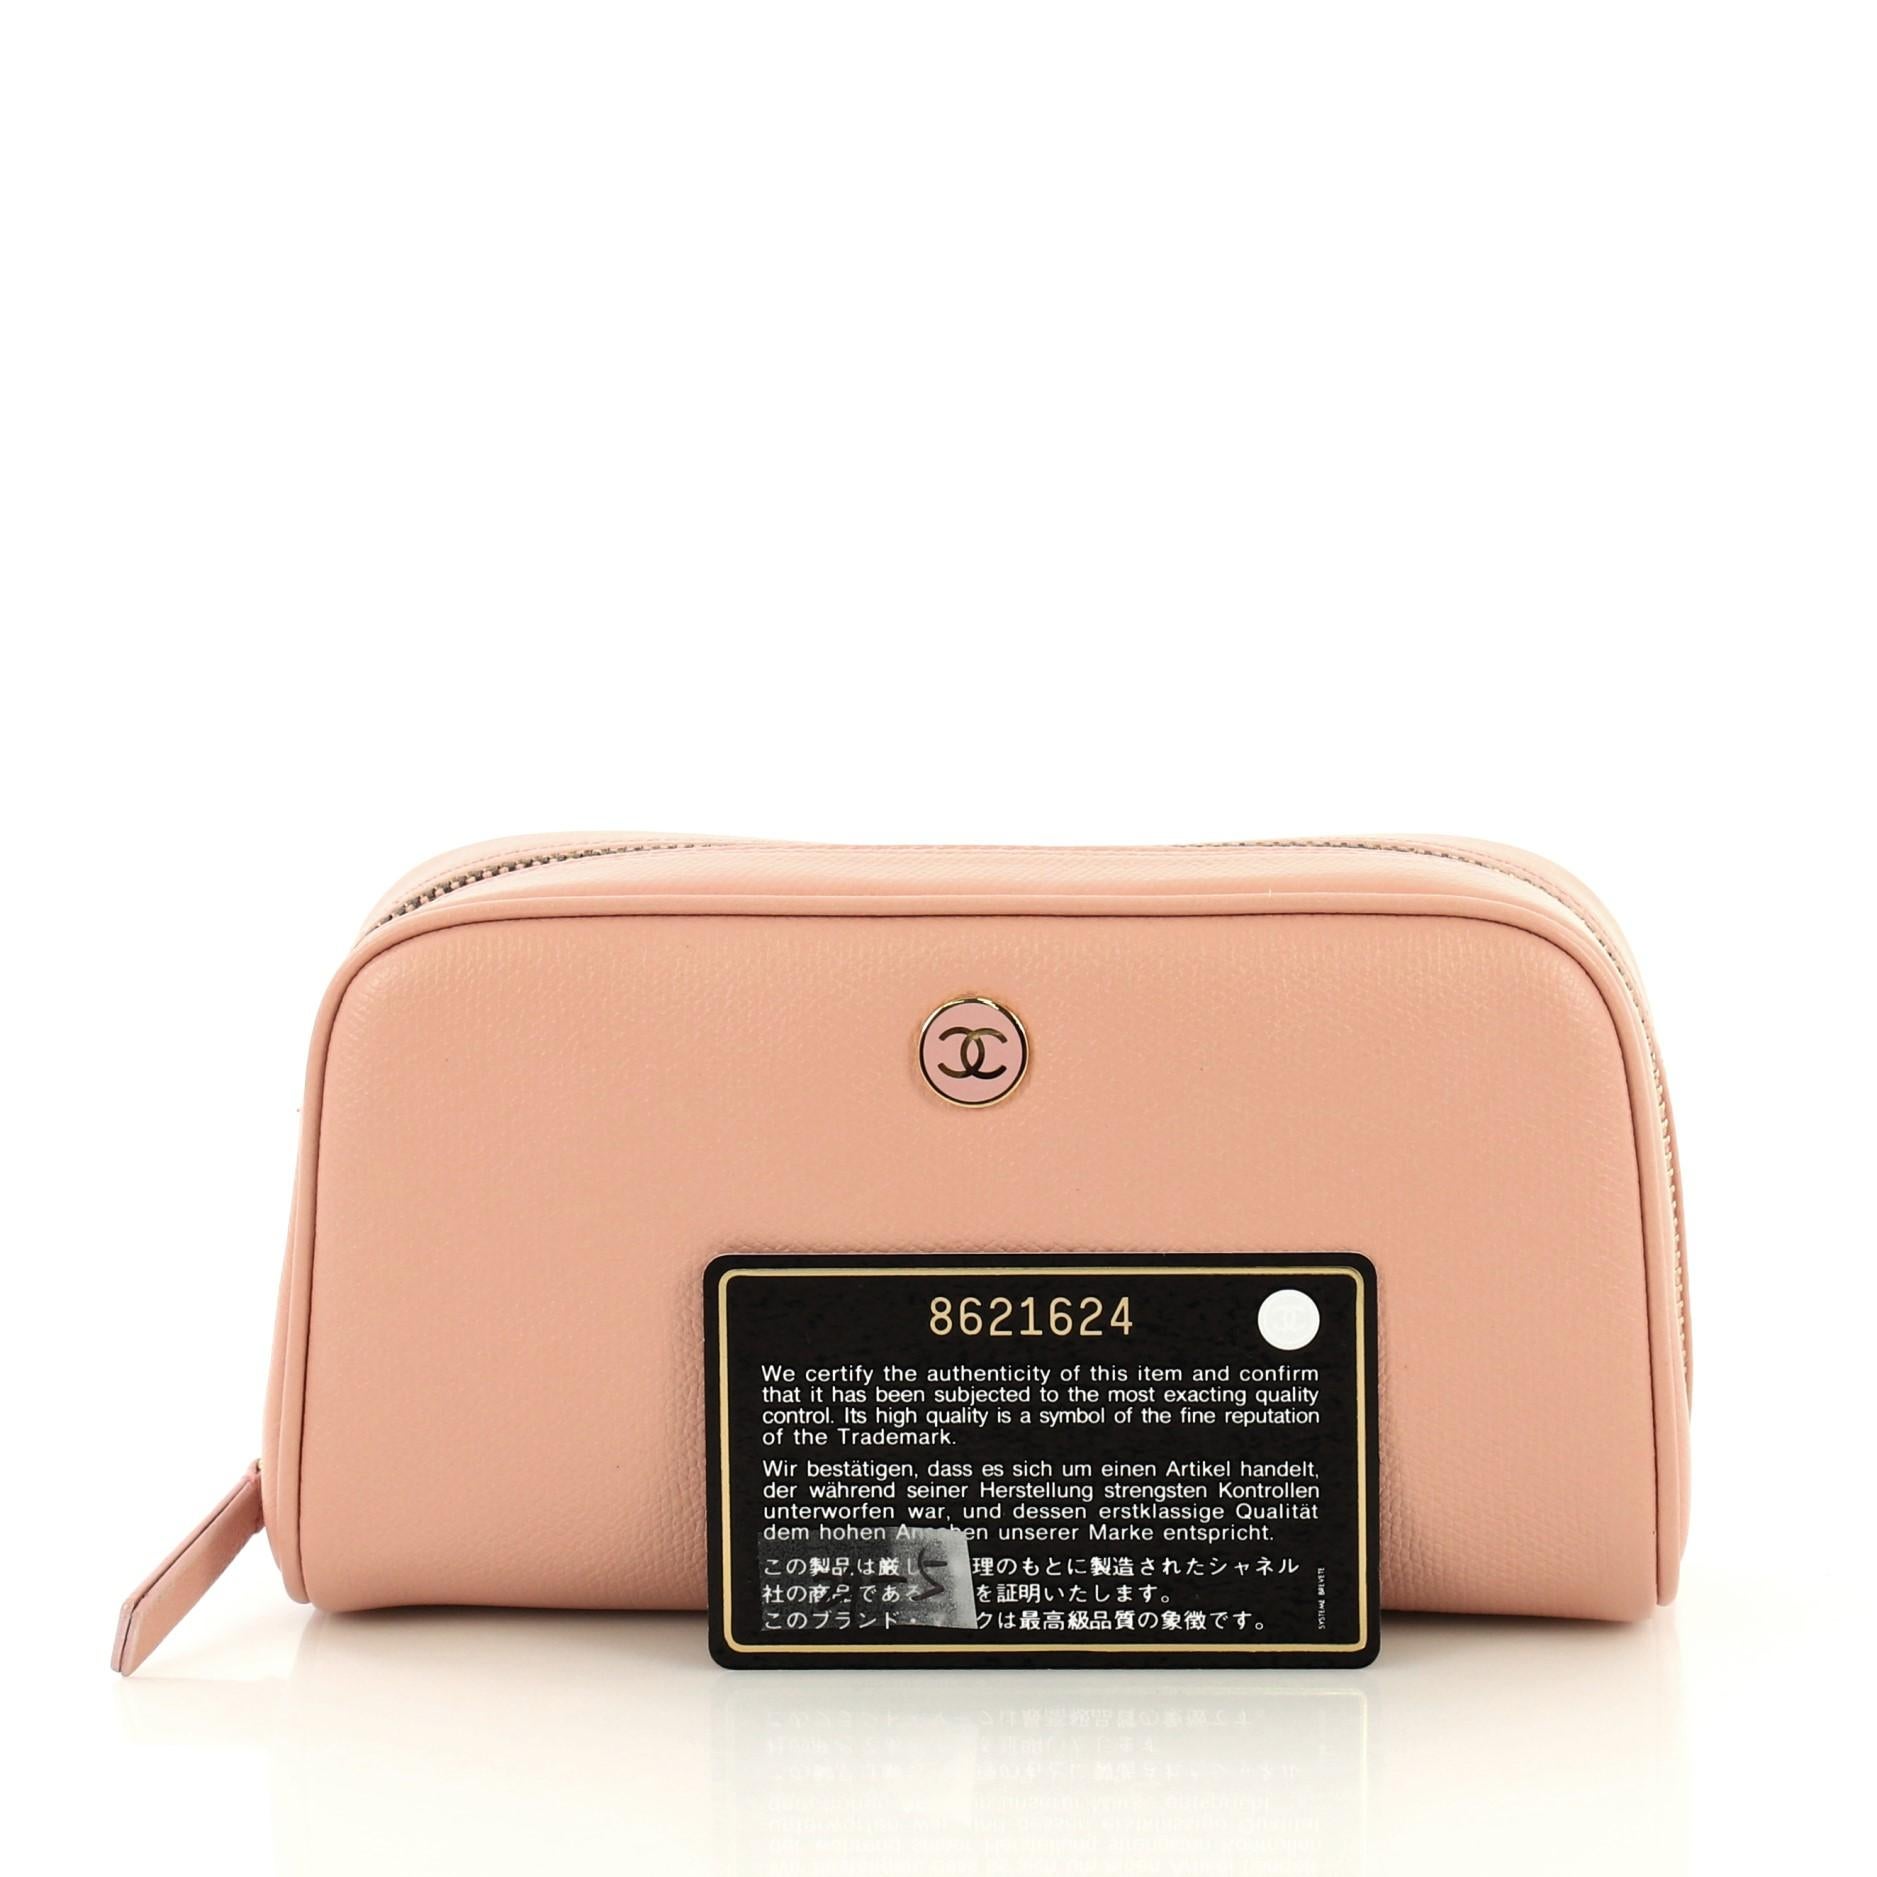 This Chanel Vintage CC Button Cosmetic Pouch Leather Medium, crafted from pink leather, features gold-tone hardware. Its zip closure opens to a neutral fabric interior. Authenticity code reads: 8621624. 

Condition: Great. Slight creasing on